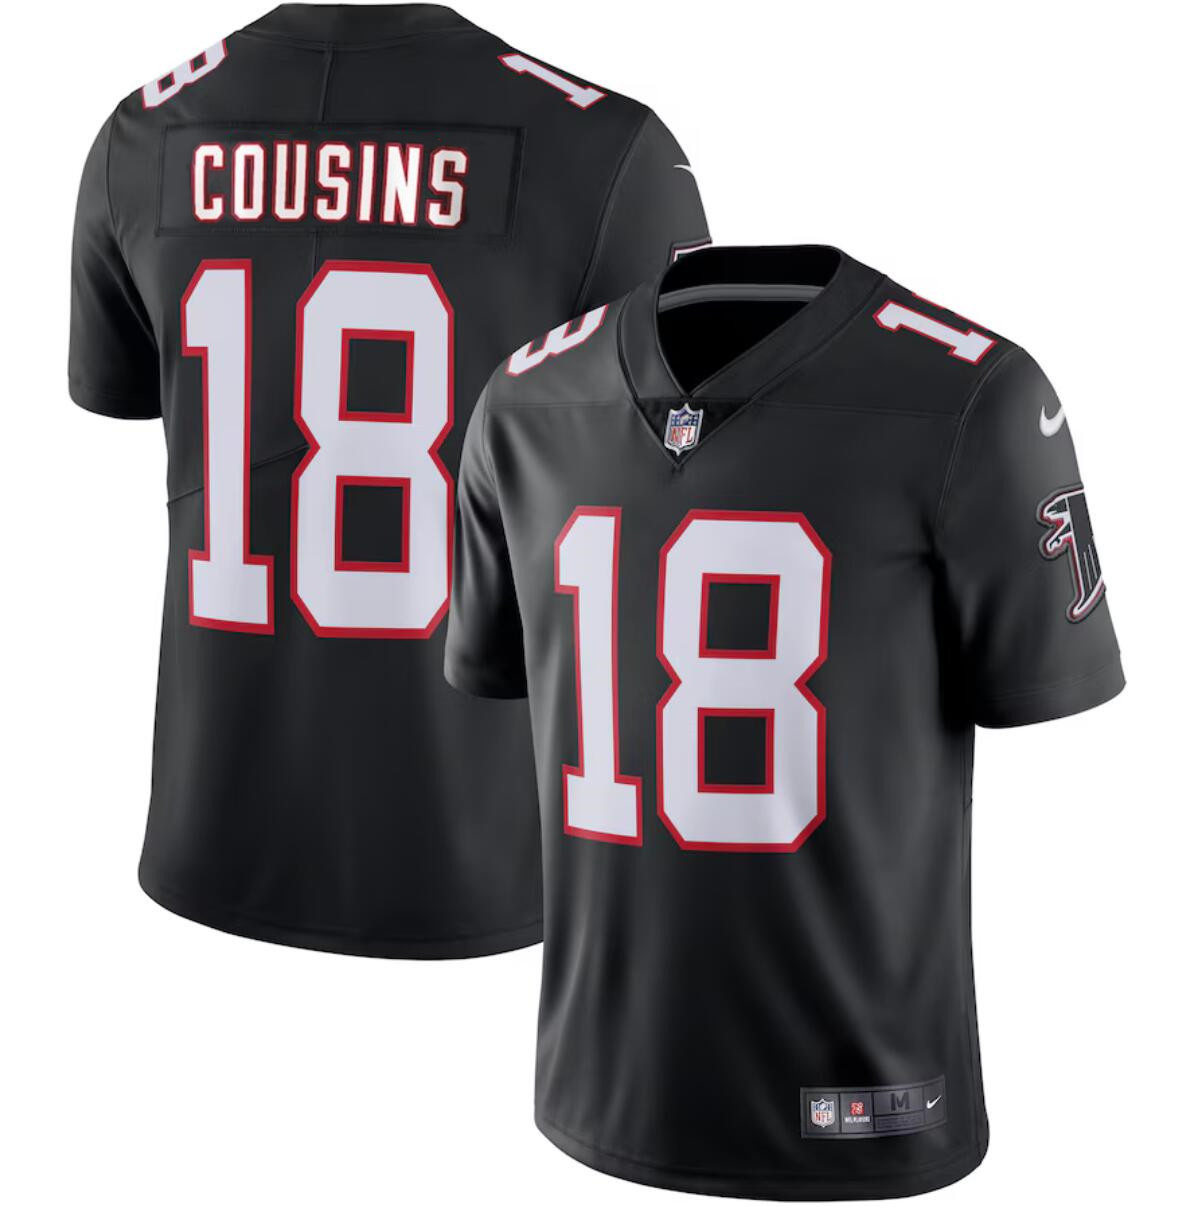 Youth Atlanta Falcons #18 Kirk Cousins Black Vapor Untouchable Limited Stitched Football Jersey